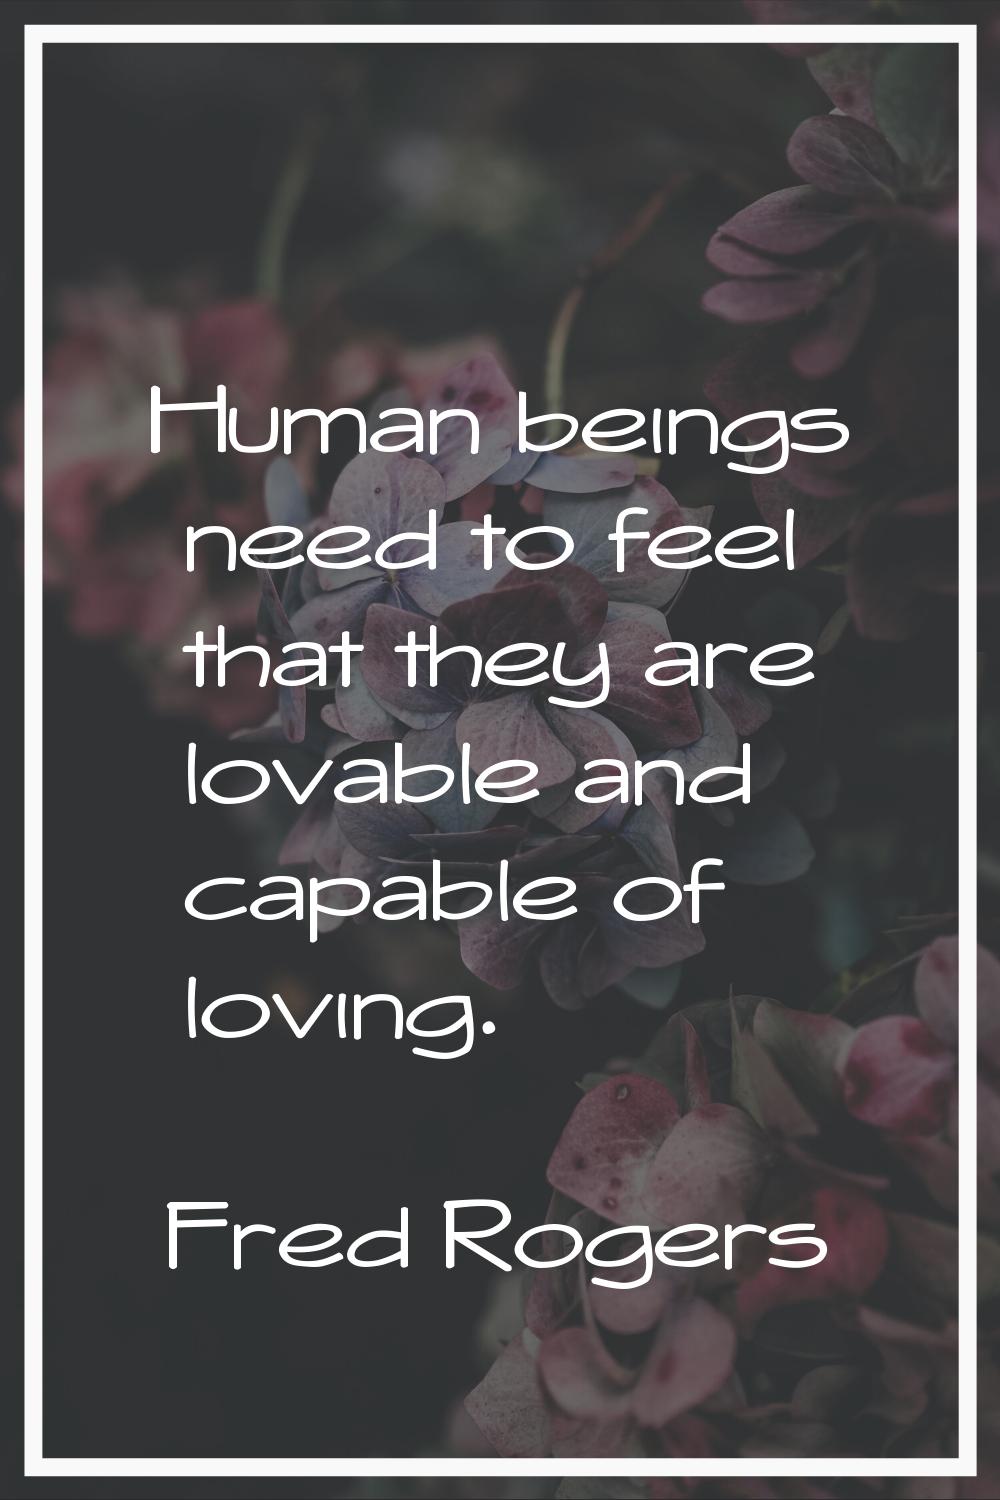 Human beings need to feel that they are lovable and capable of loving.